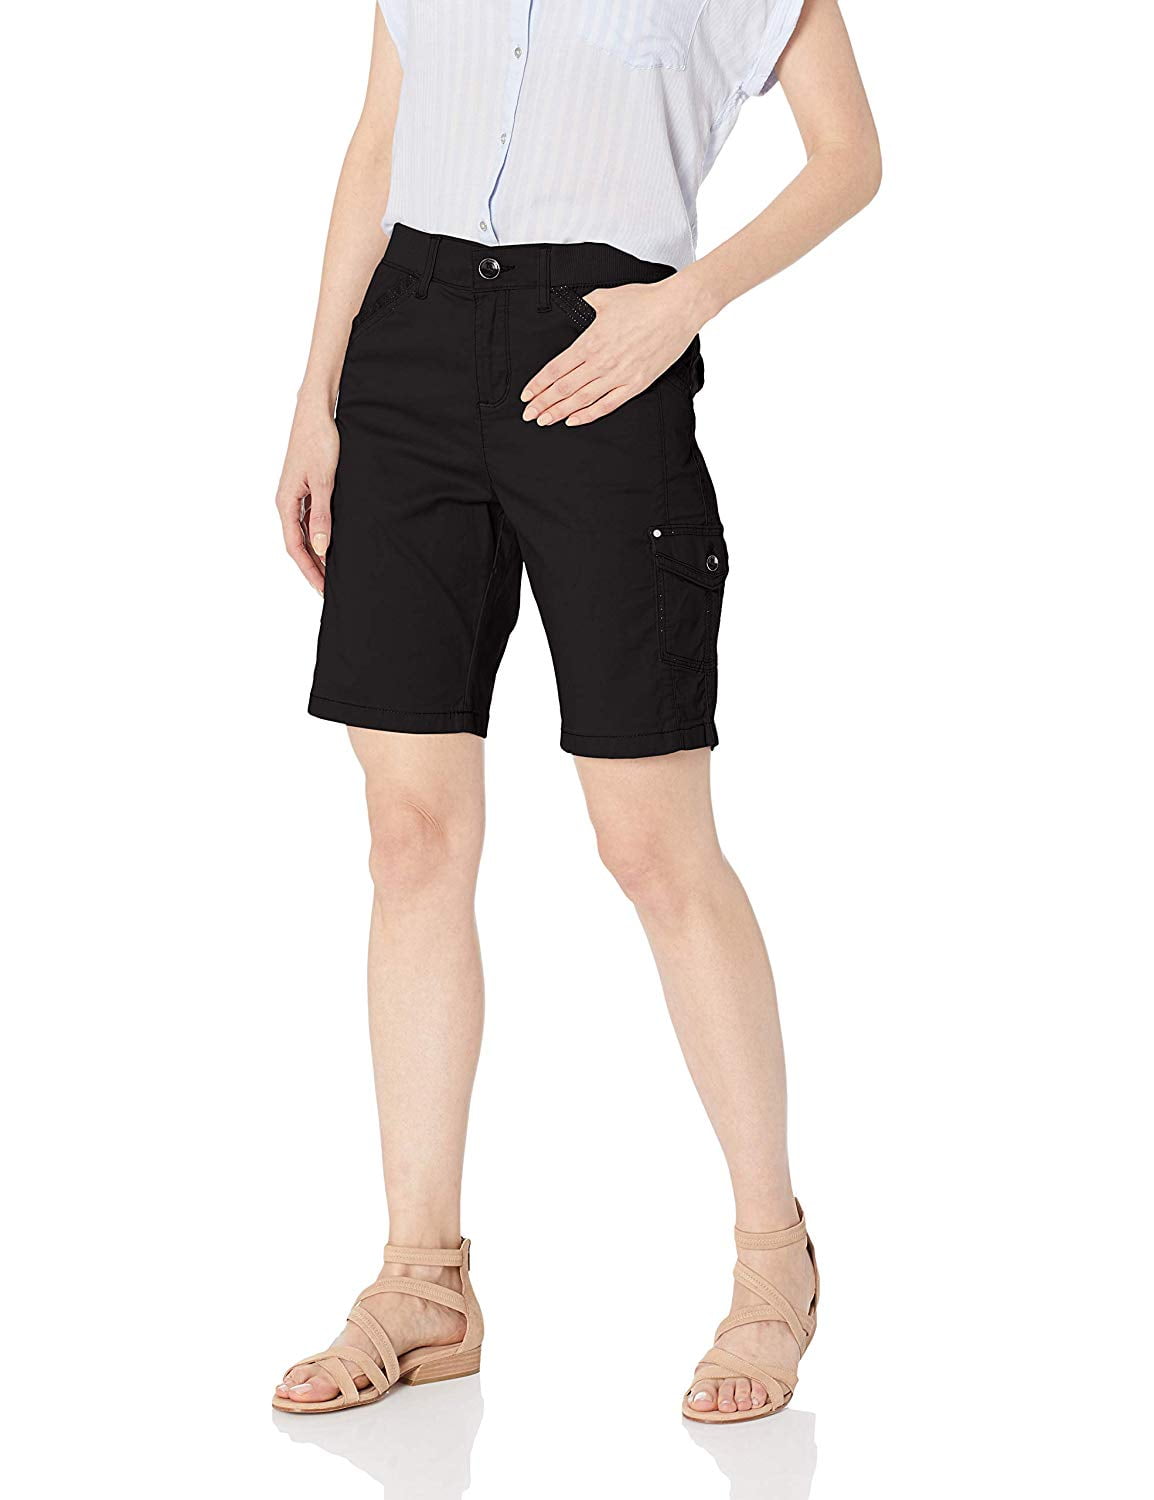 Lee Uniforms Womens Plus Size Flex-to-go Relaxed Fit Cargo Bermuda Short  Women Casual